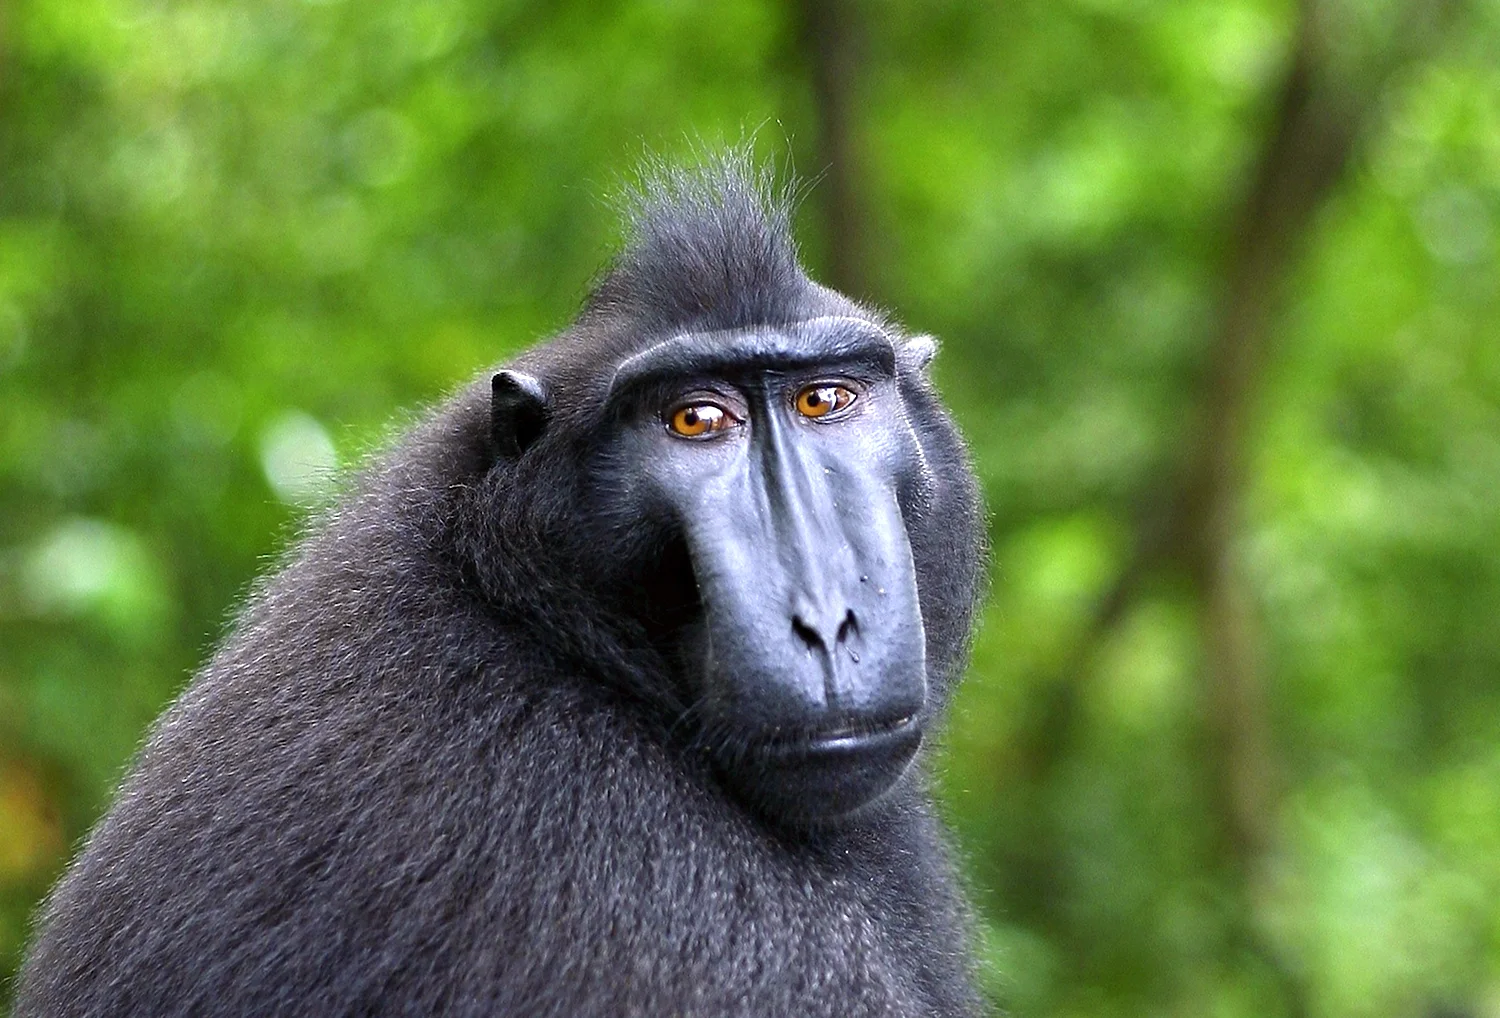 Crested Black macaque